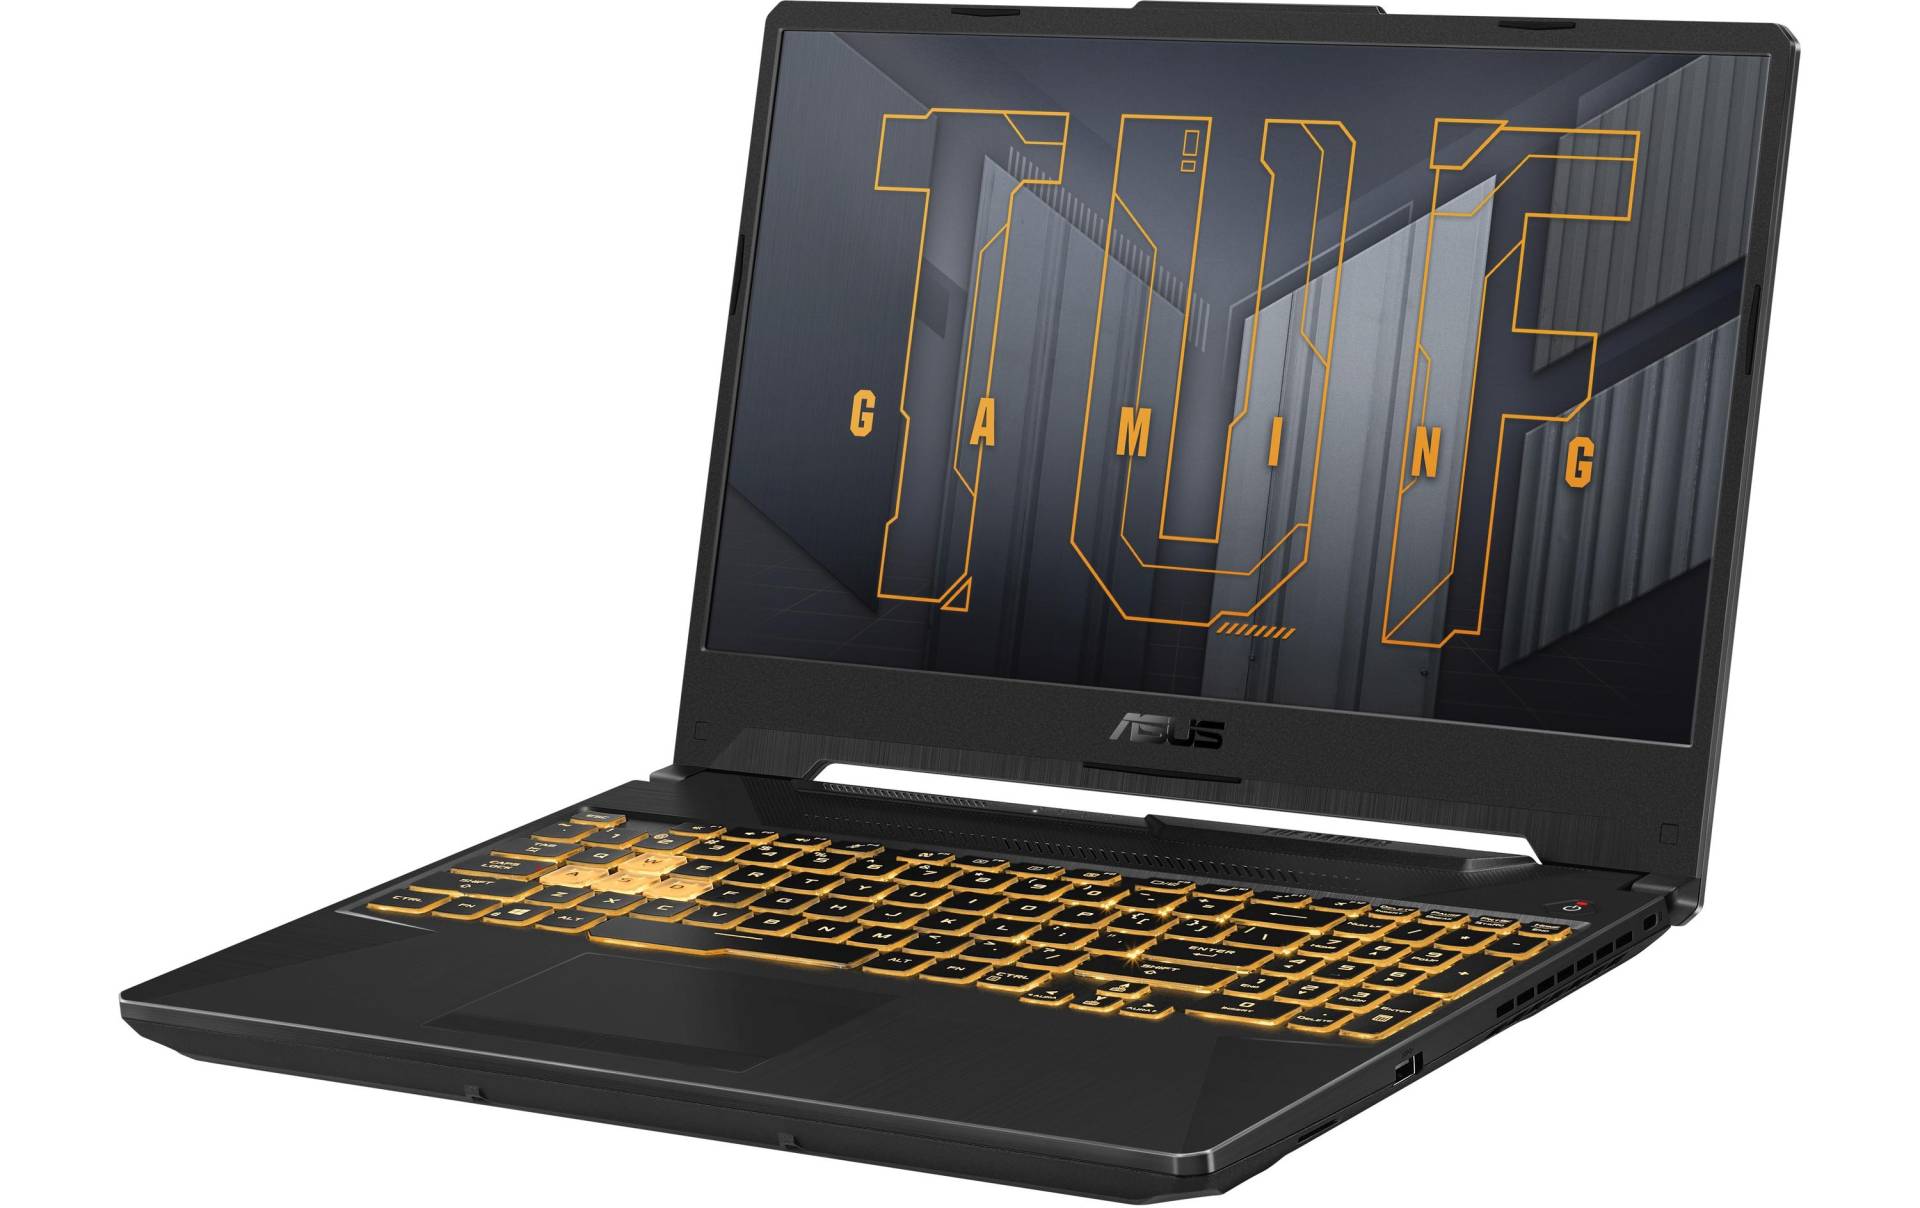 Asus Notebook »TUF Gaming F15«, 39,62 cm, / 15,6 Zoll, Intel, Core i7, GeForce RTX 3050, 512 GB SSD von Asus